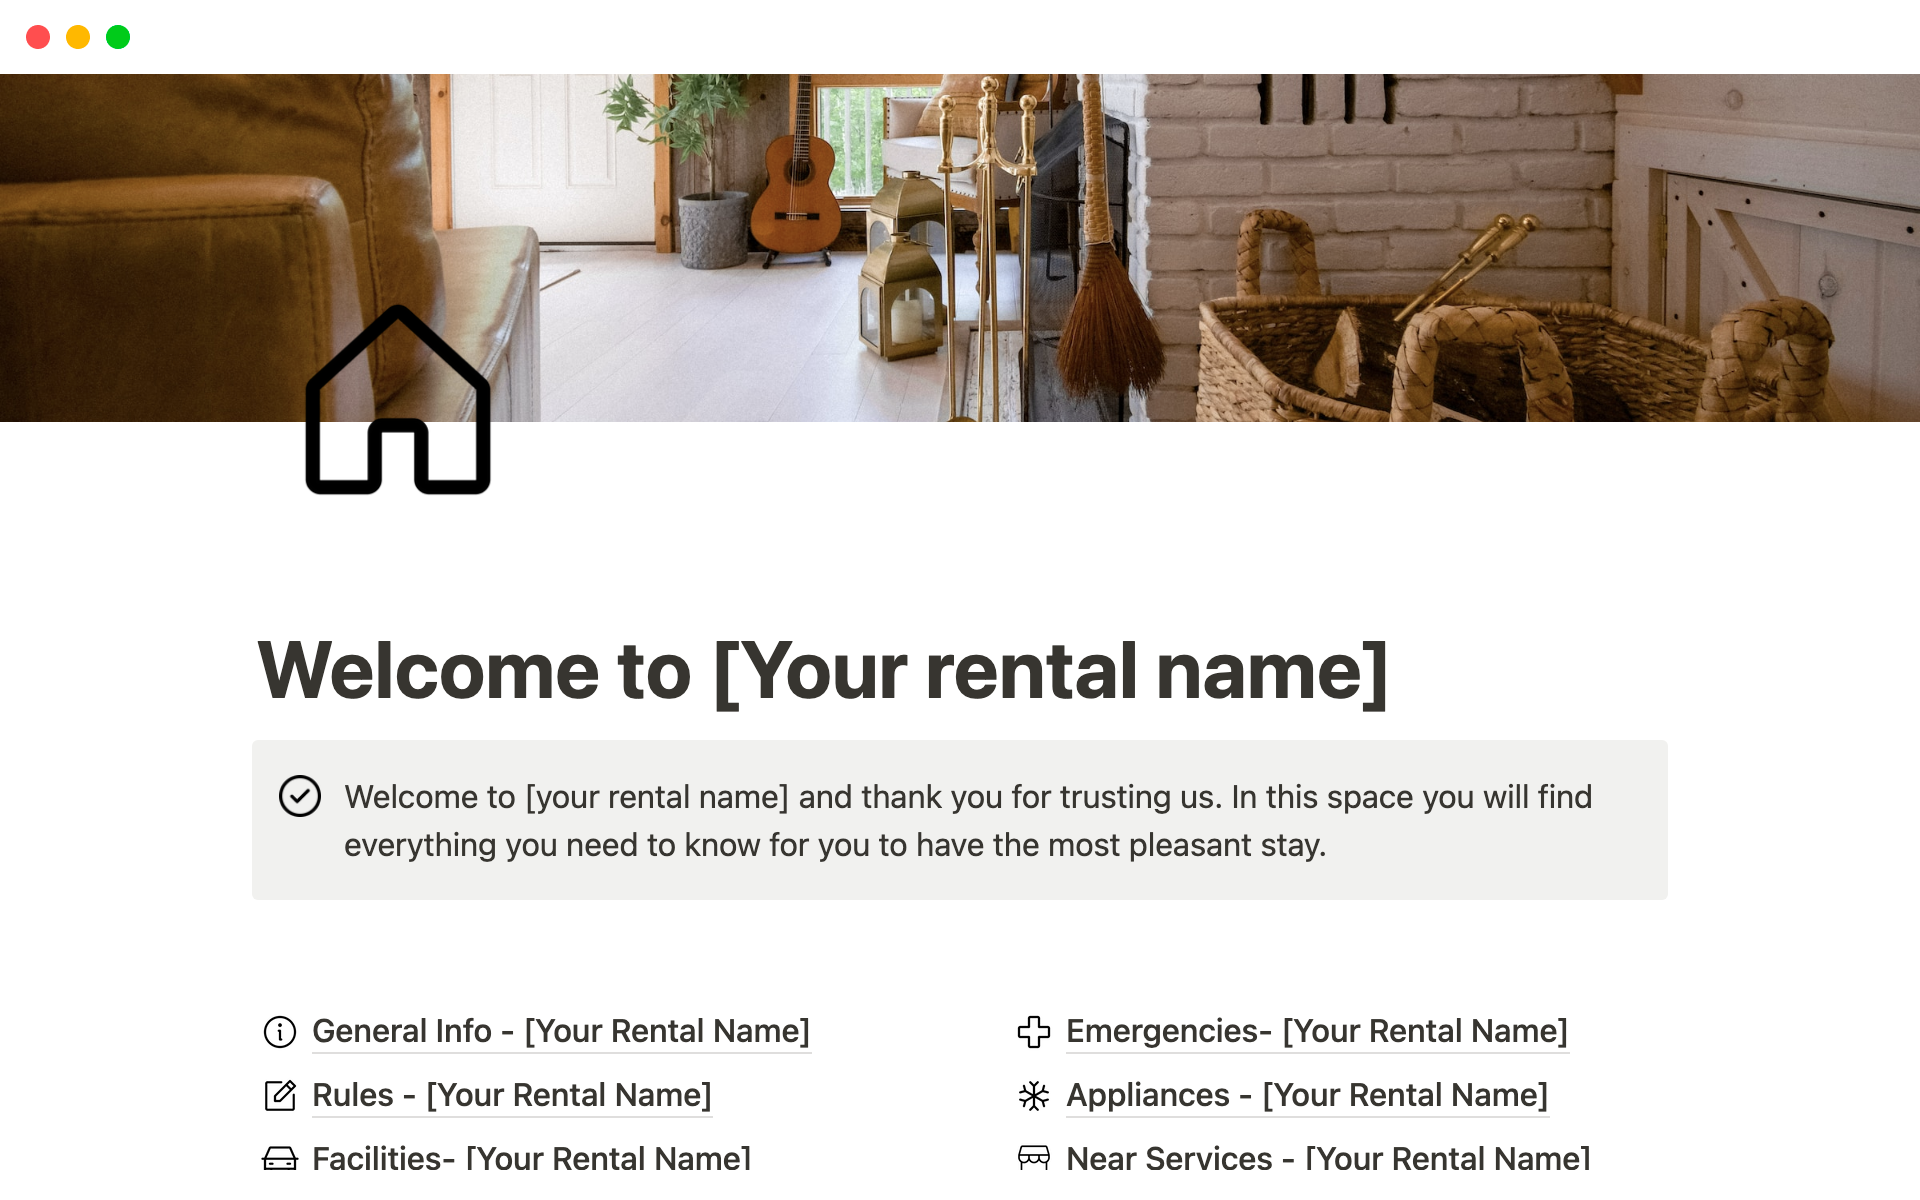 With this Notion template, you will be able to send your guests all the information of your rental in one single link.